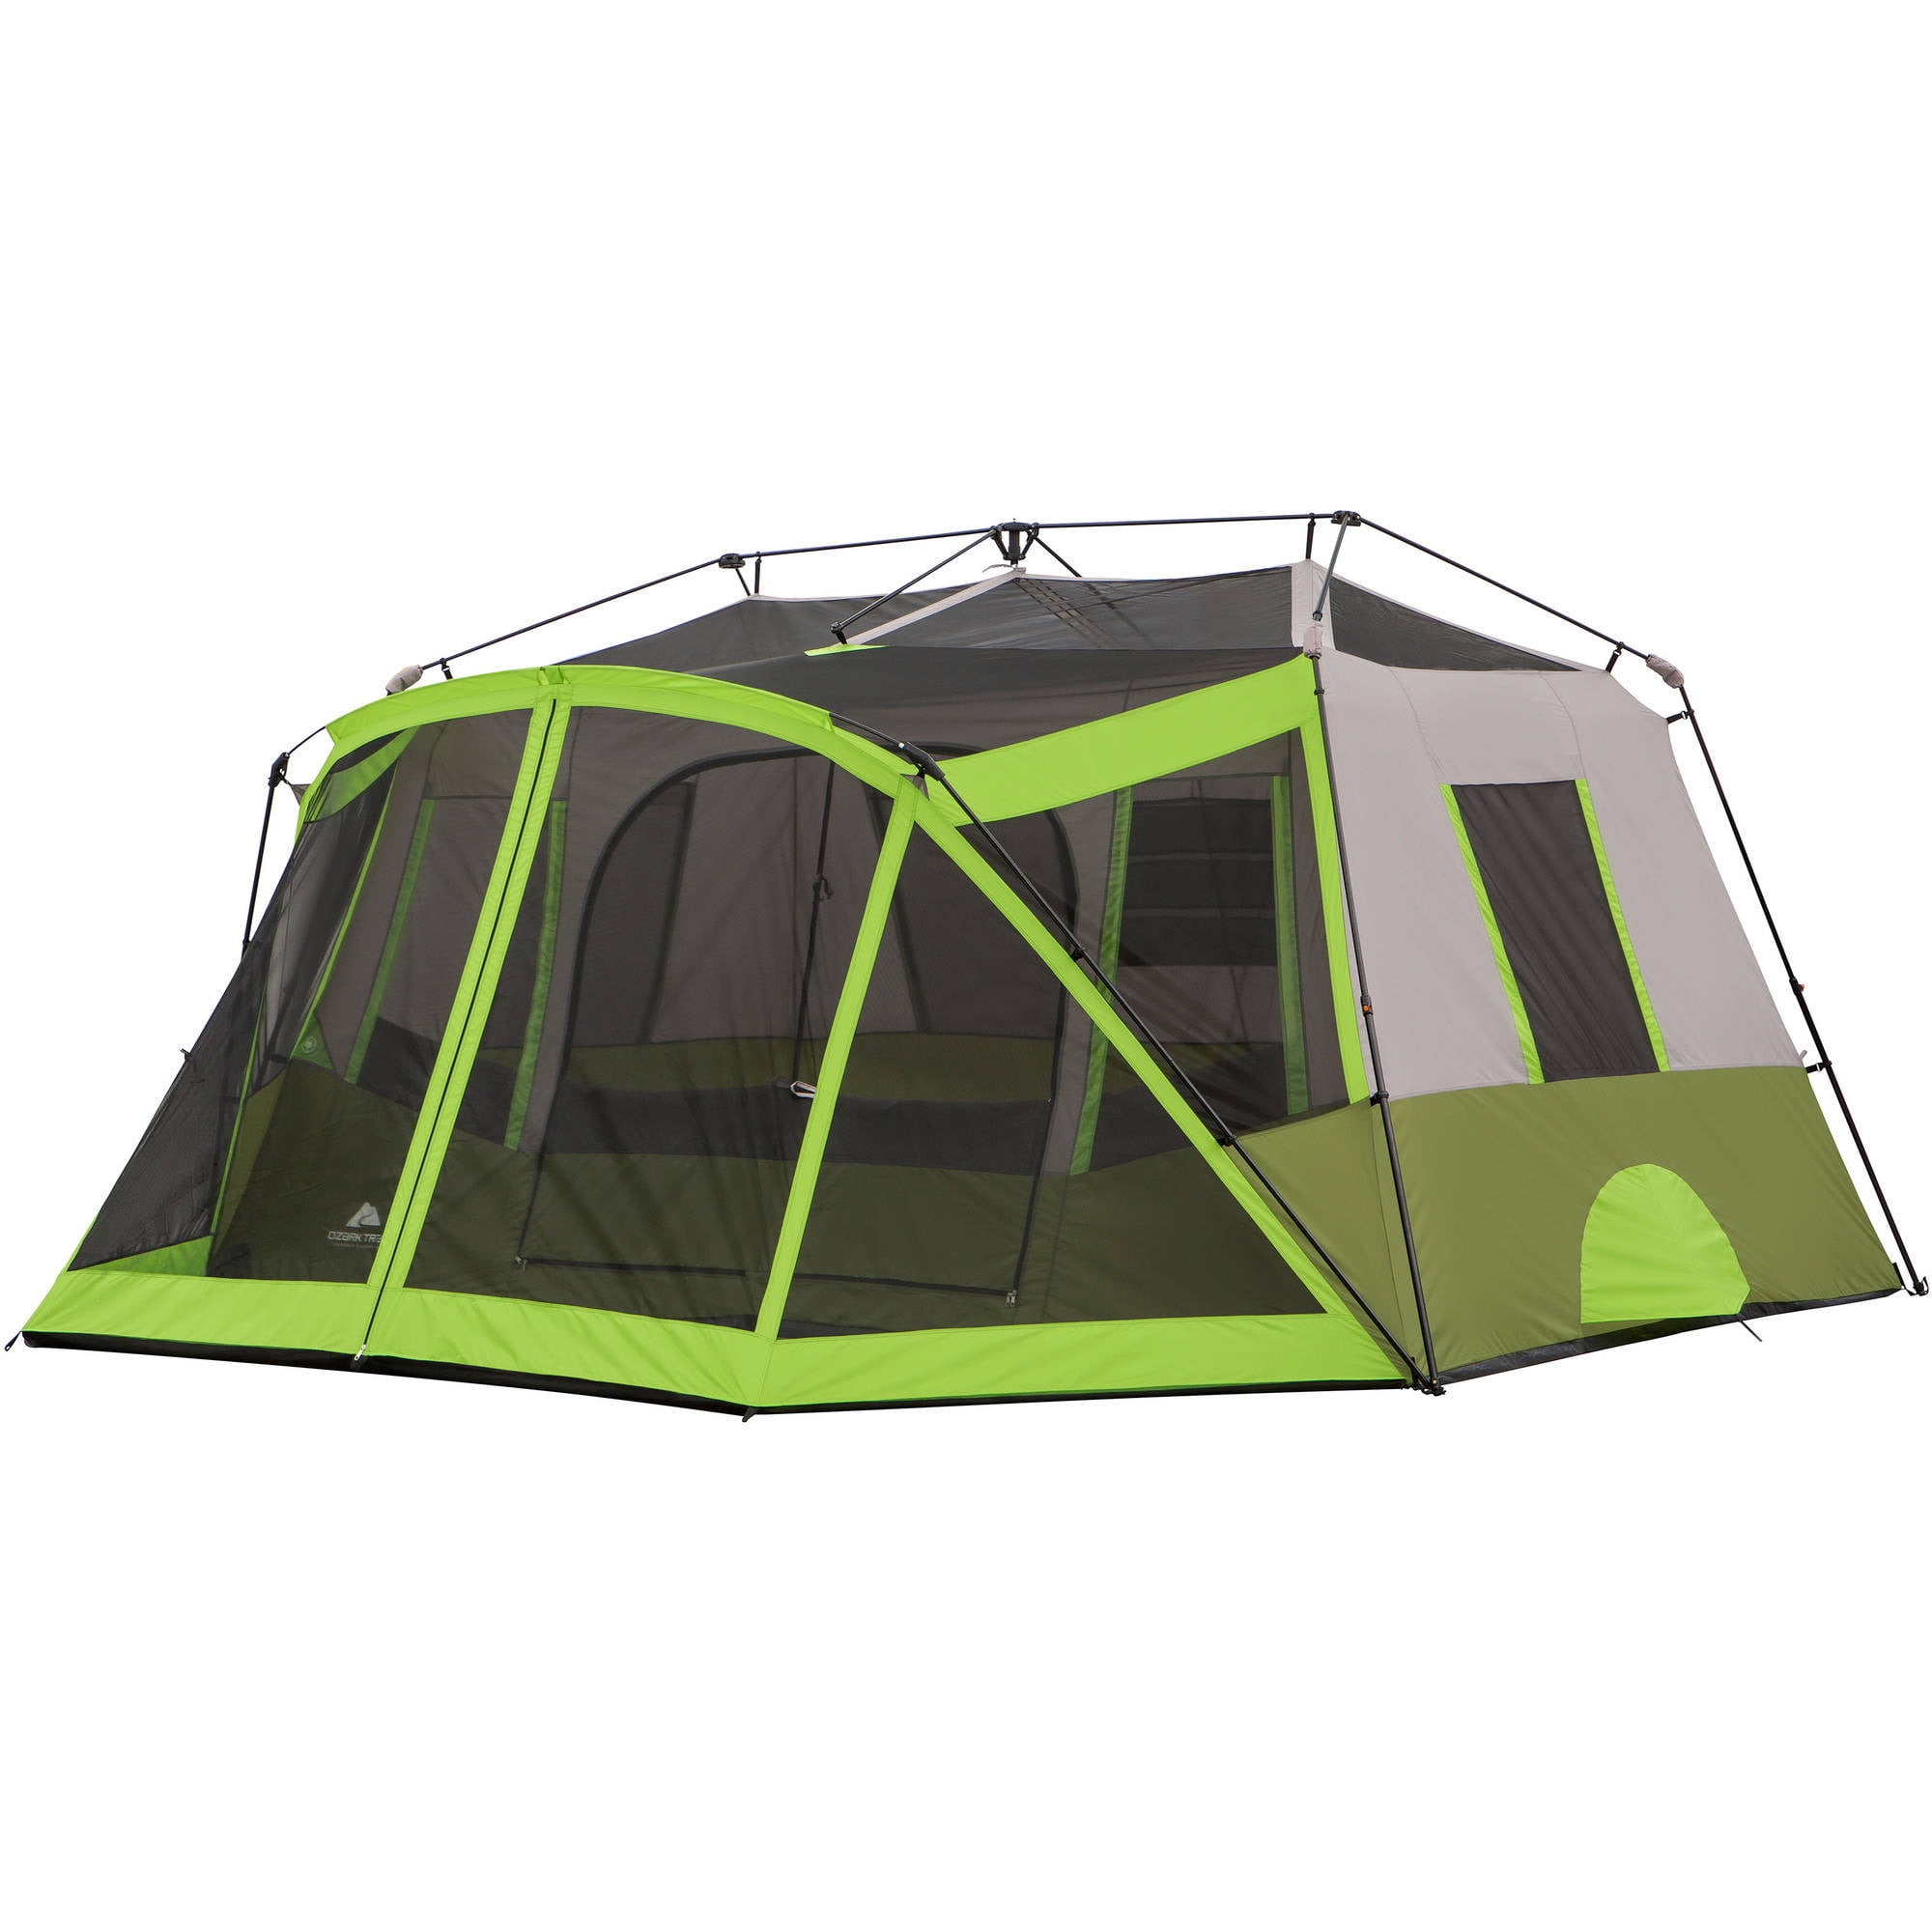 Ozark Trail 9 Person 2 Room Instant Cabin Tent with Screen Room -  Walmart.com